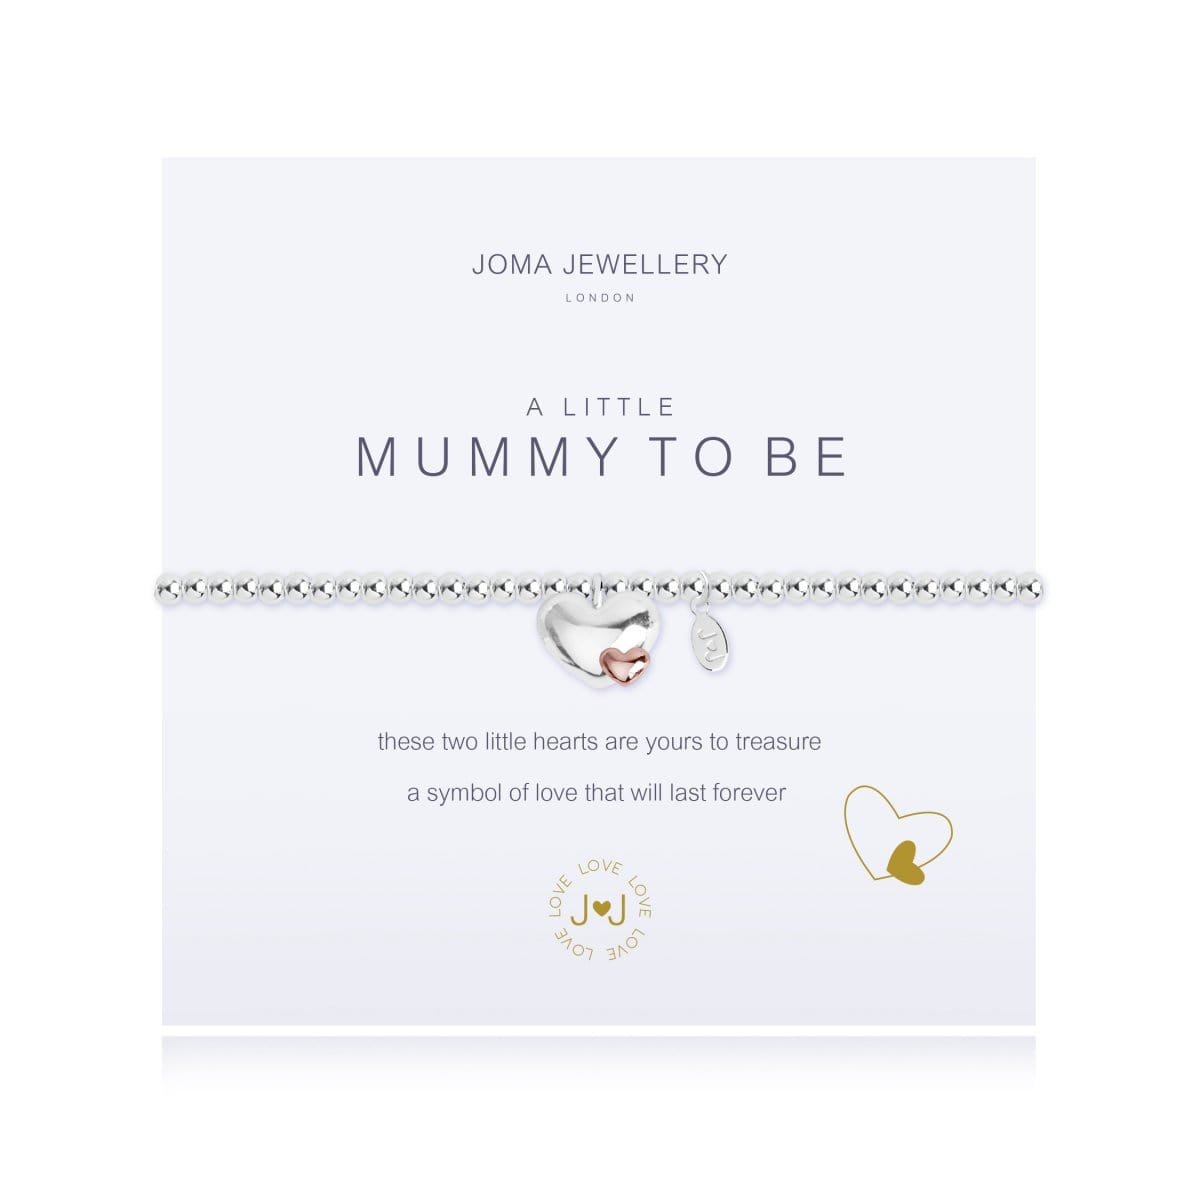 A LITTLE MUMMY TO BE BRACELET by Joma Jewellery - Bumbles & Boo